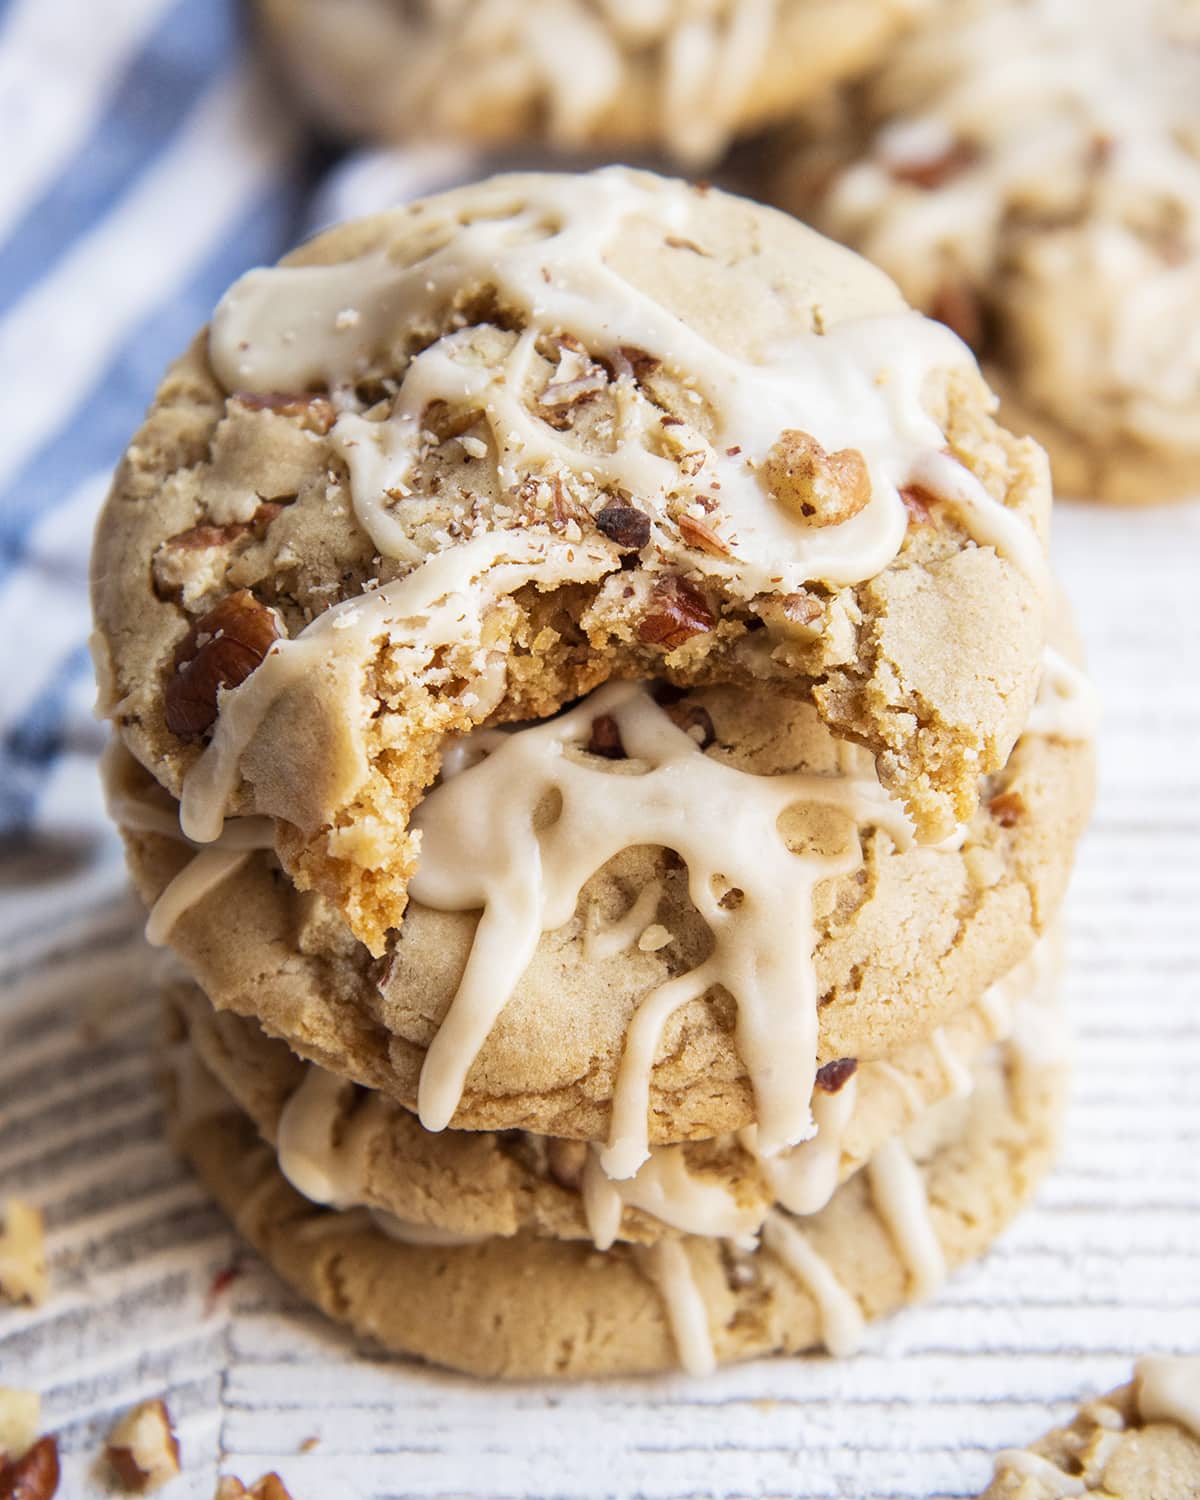 A stack of four maple pecan cookies, and the top cookie has a bite out of it.